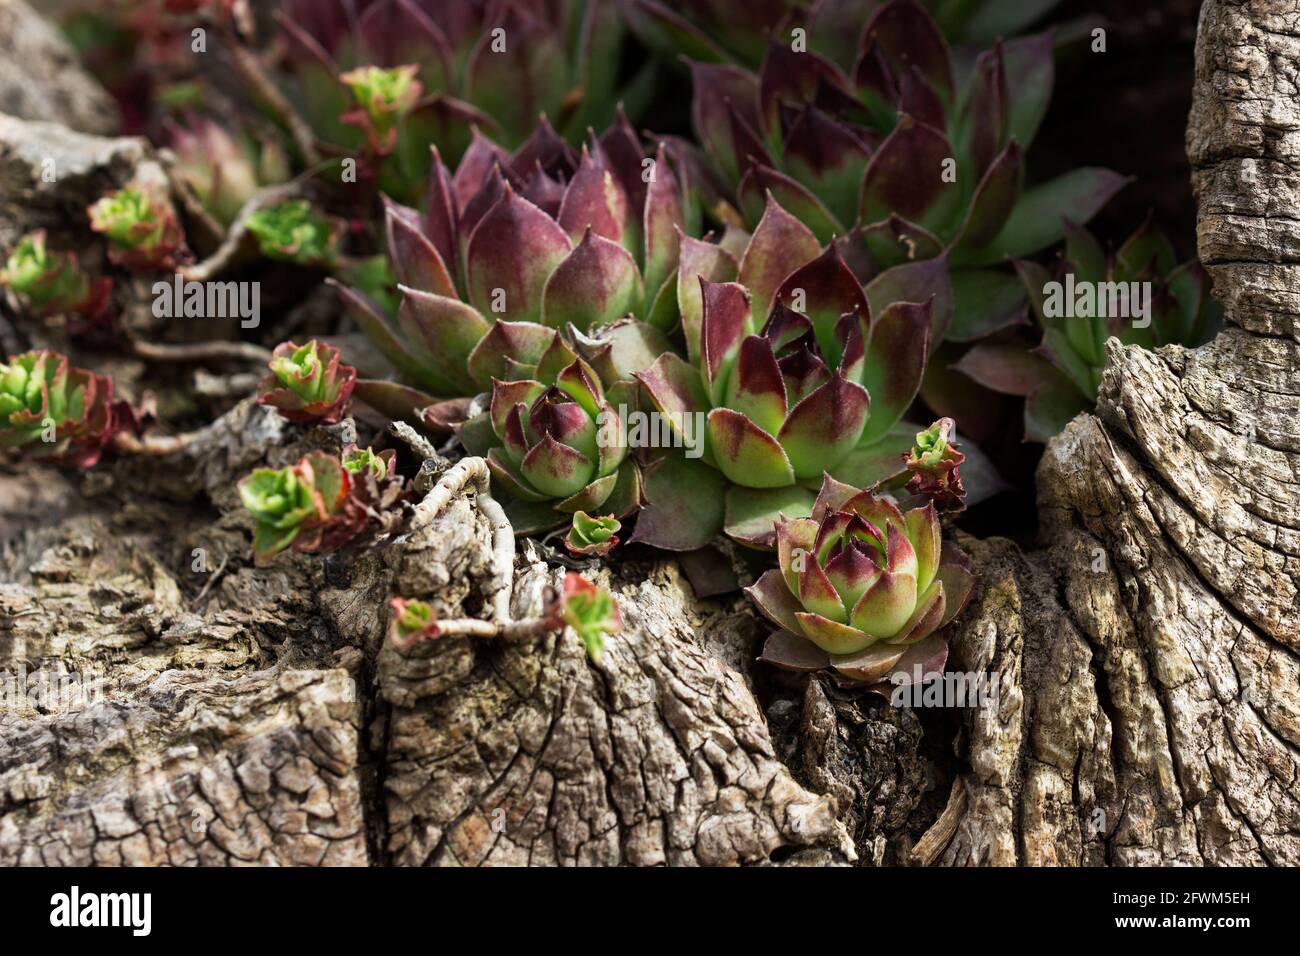 Succulents are planted in an old tree stump on a concrete site in the garden. Stock Photo